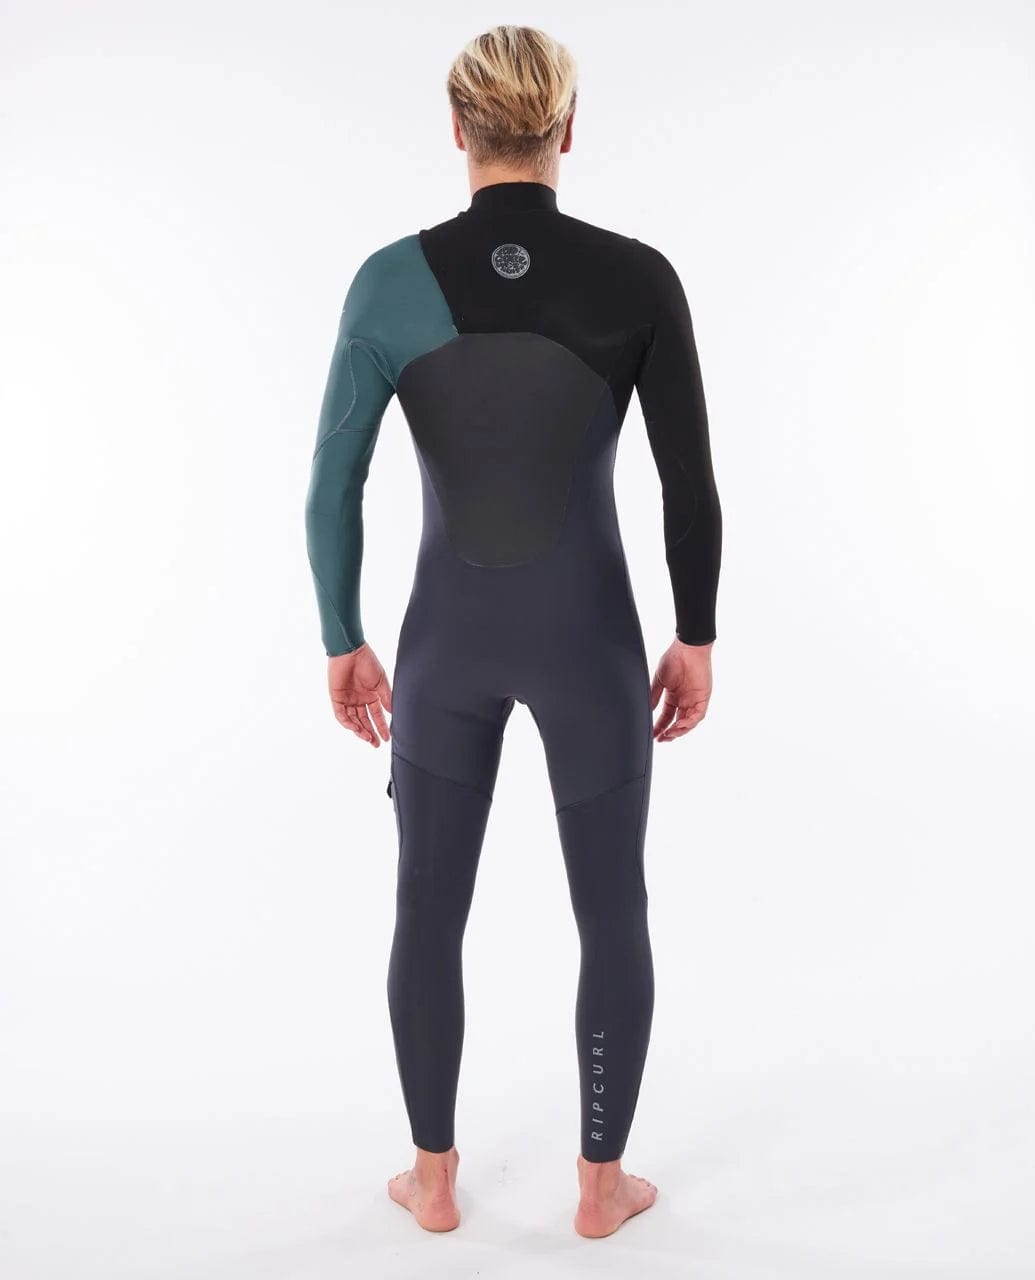 Ripcurl Flashbomb 4/3 Chest Zip Wetsuit (Green) Rip Curl